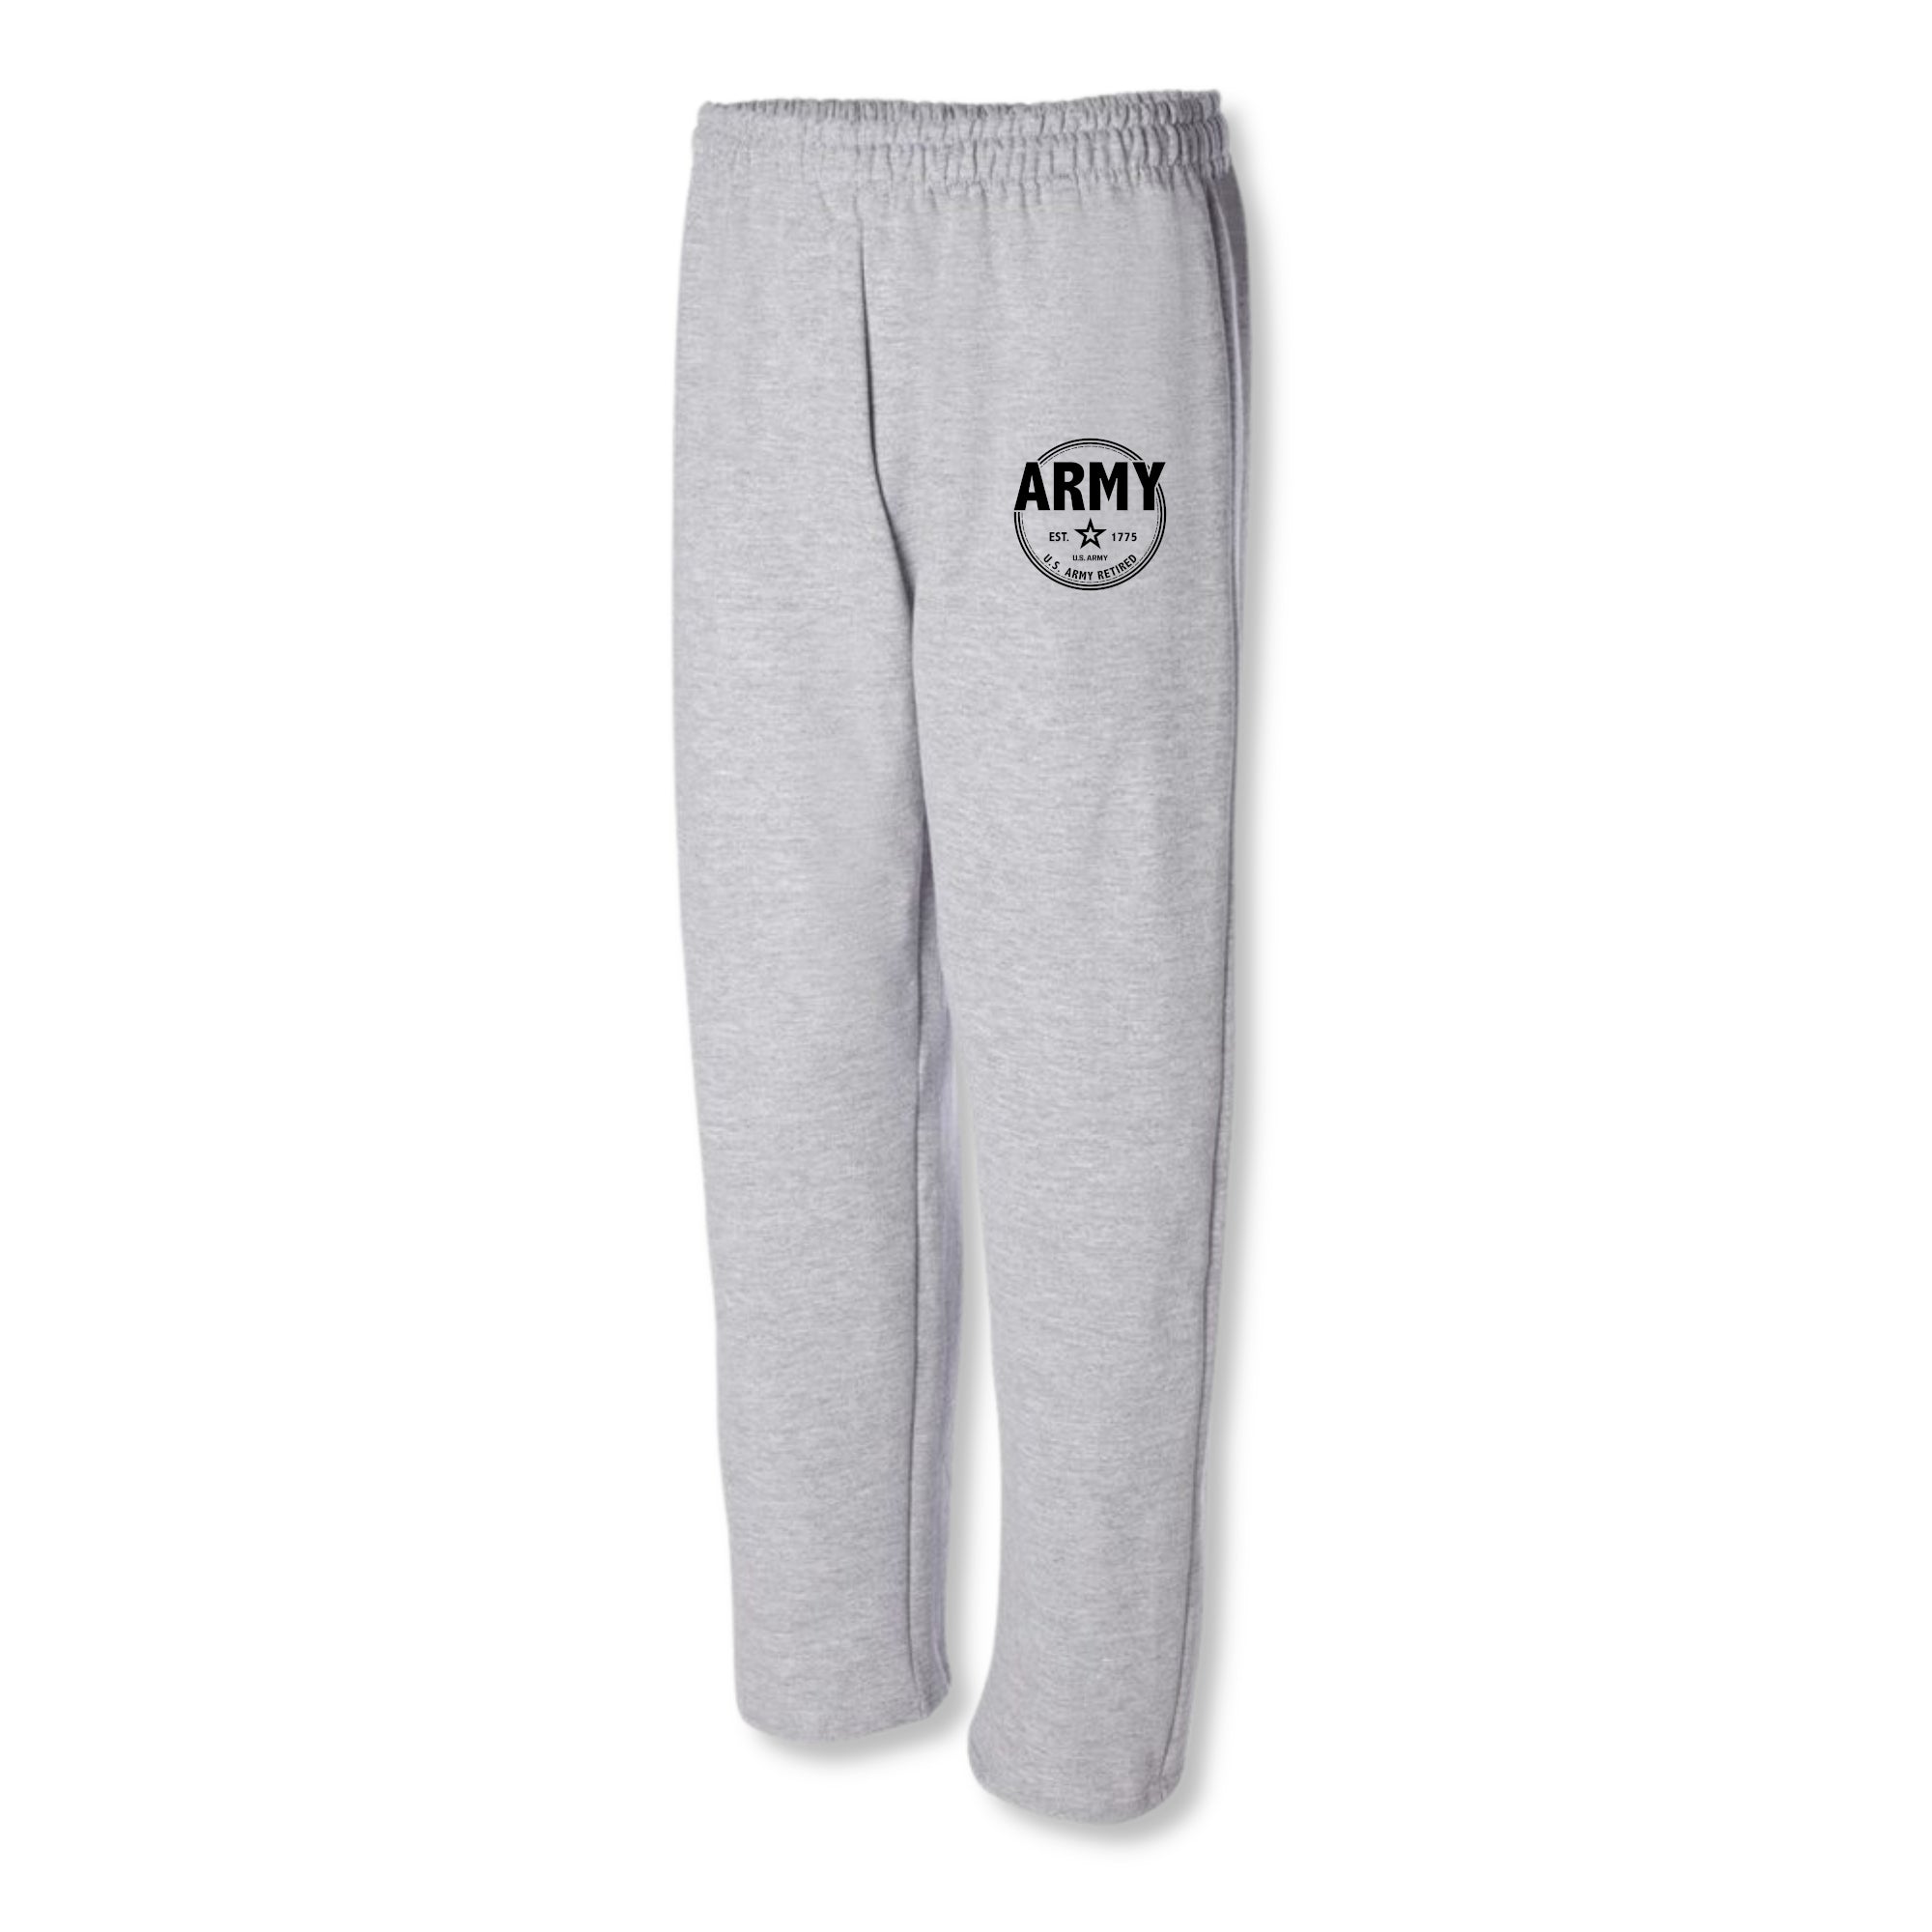 Army Retired Sweatpant